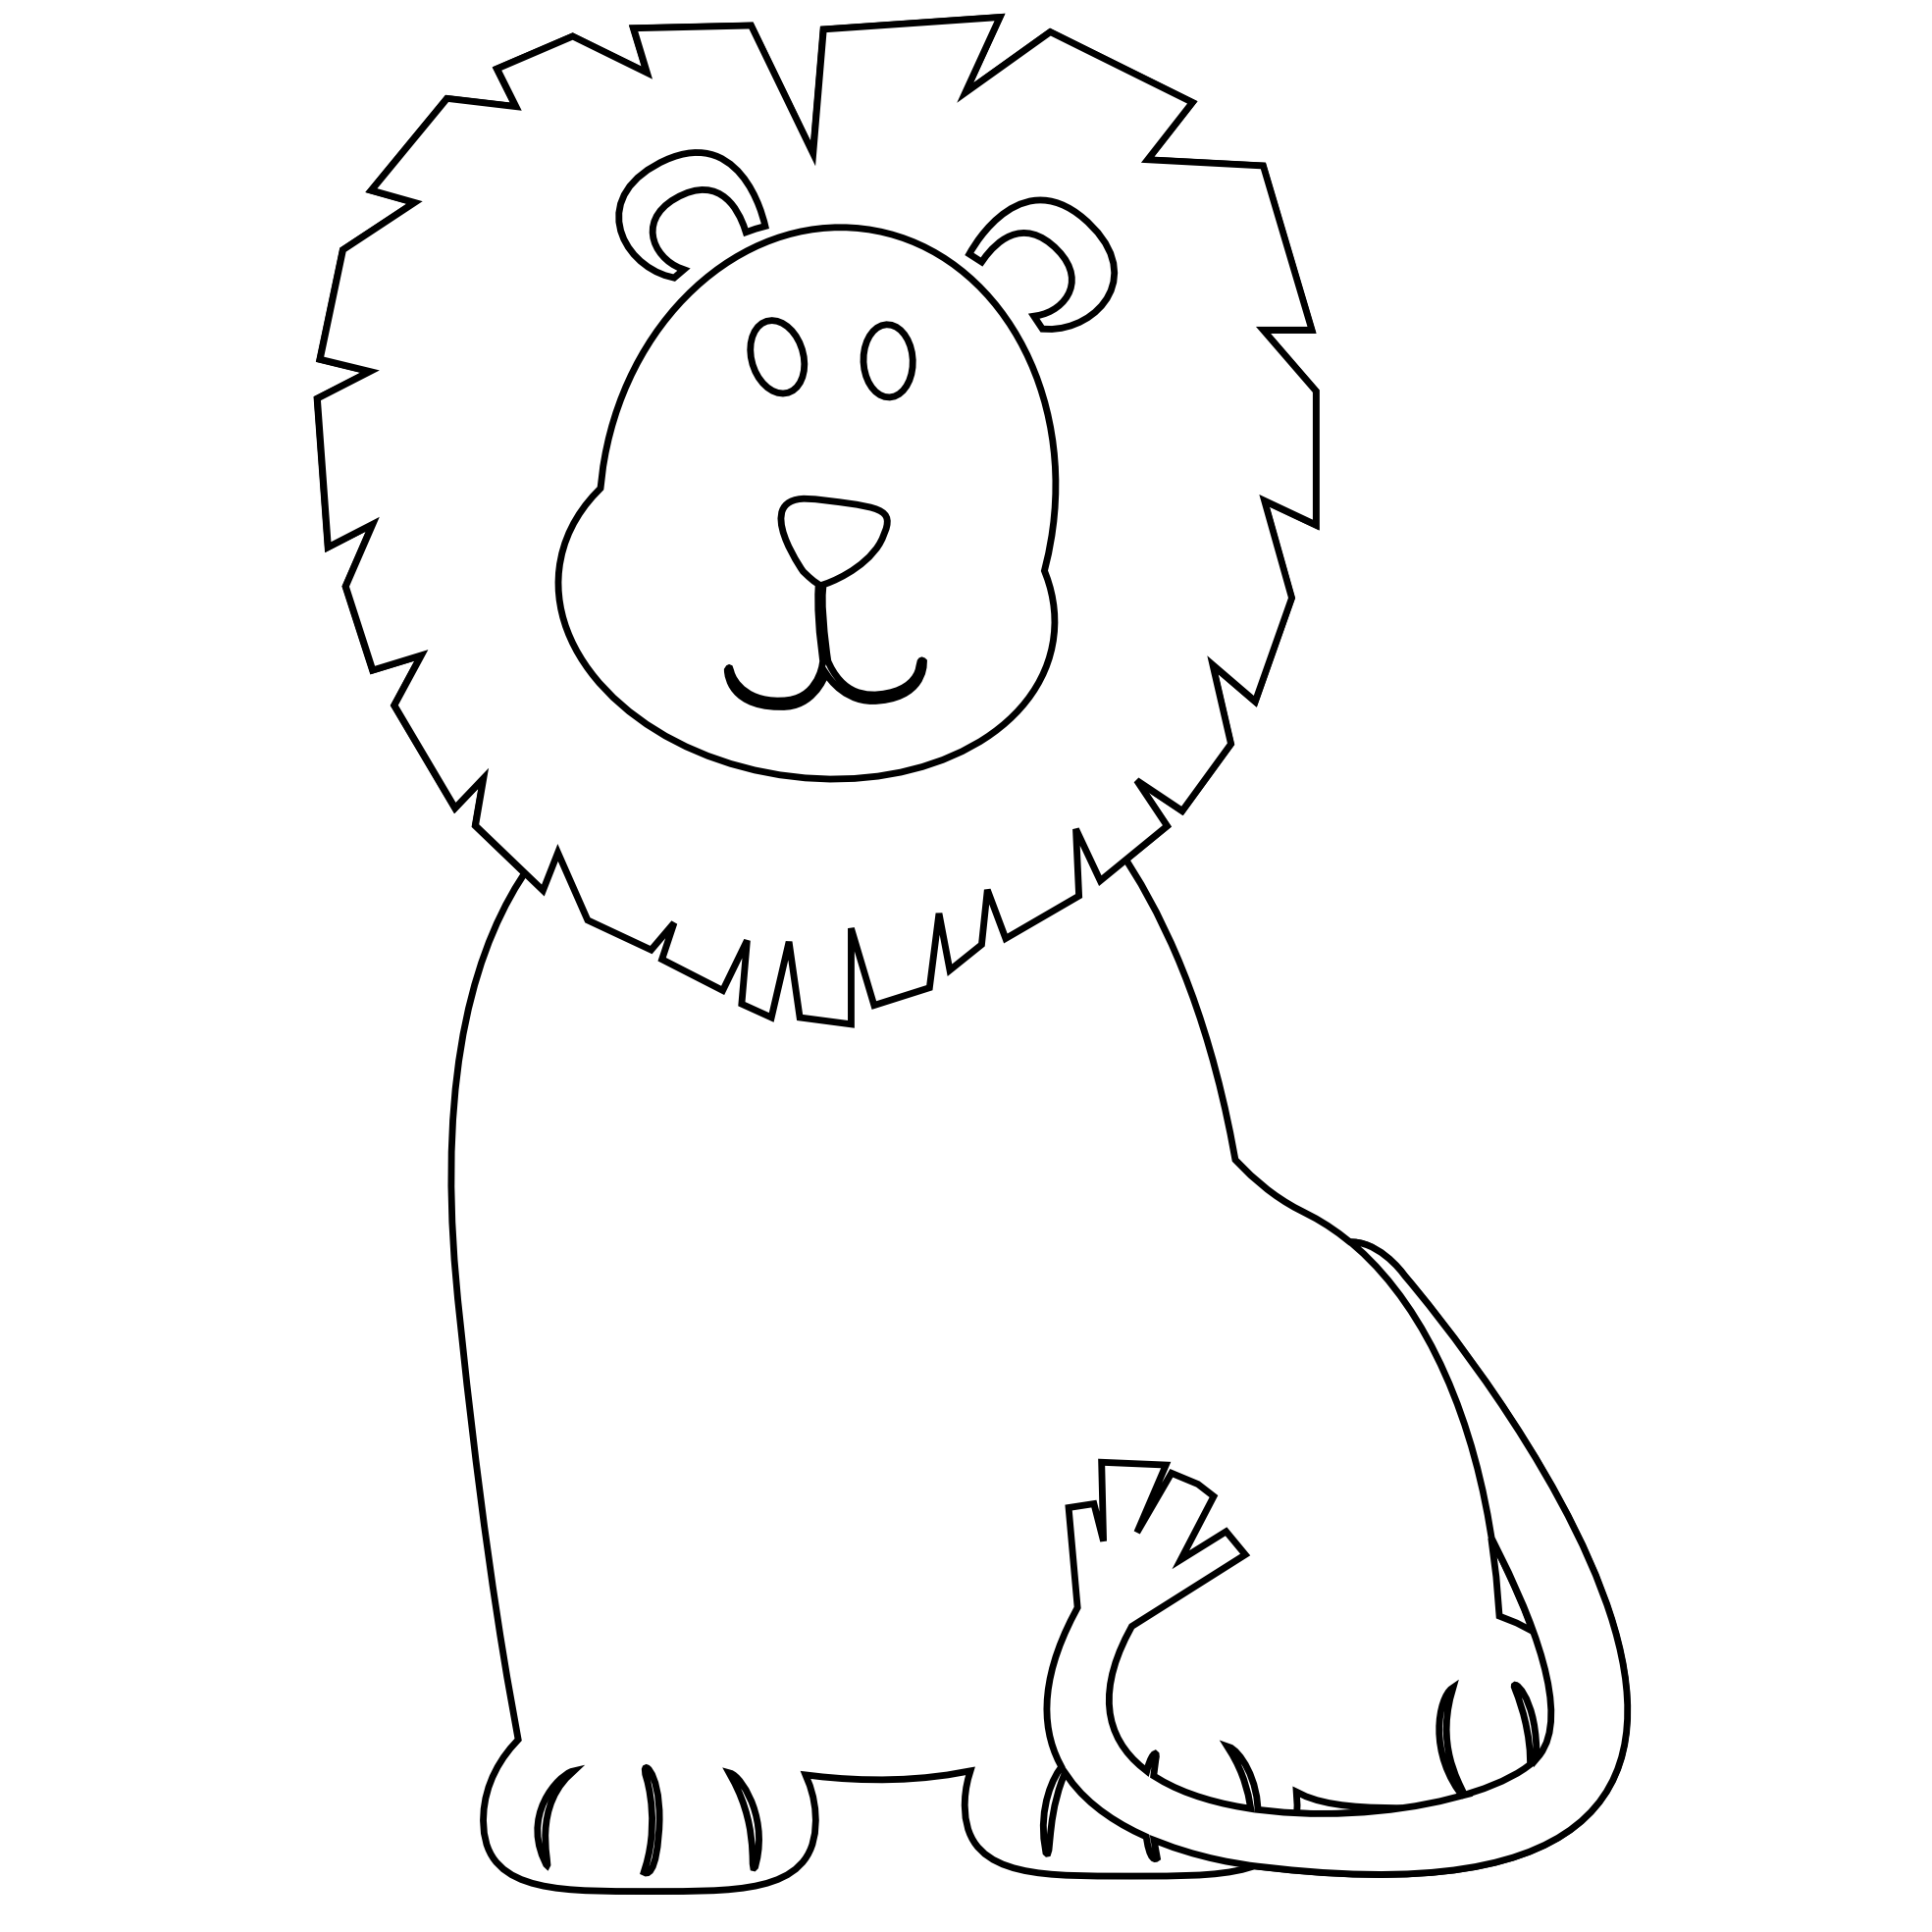 lion clipart silly